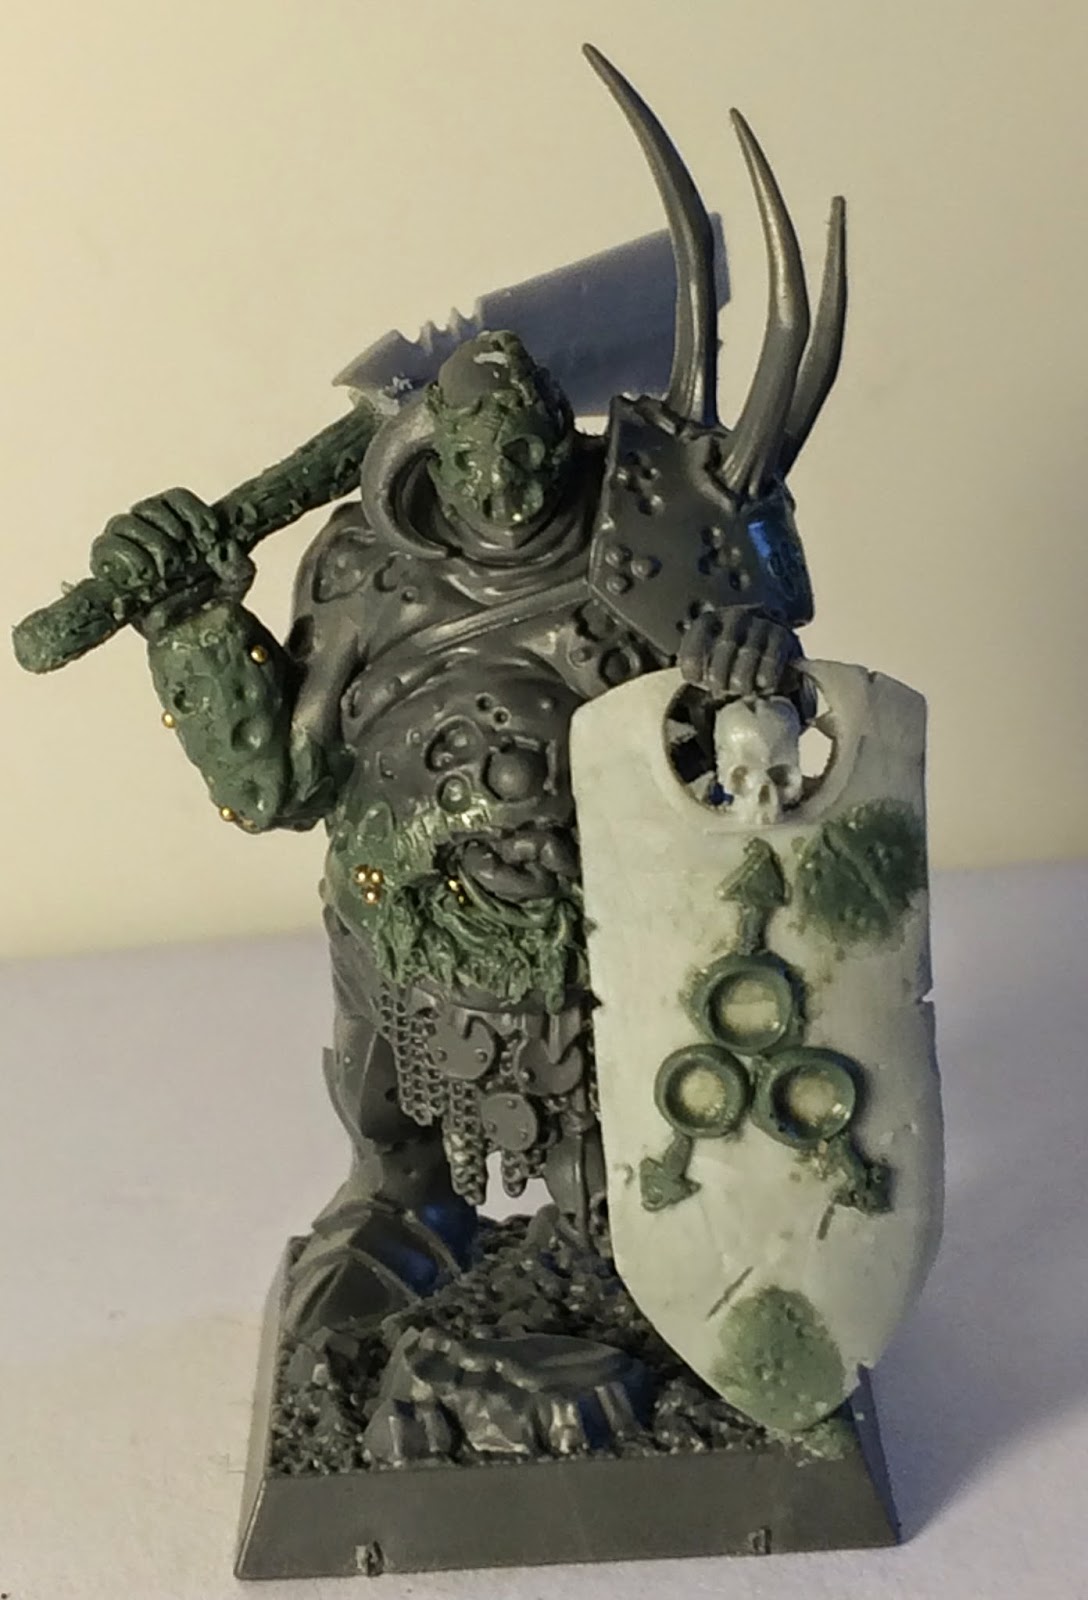 Faeit 212: What's On Your Nurgle